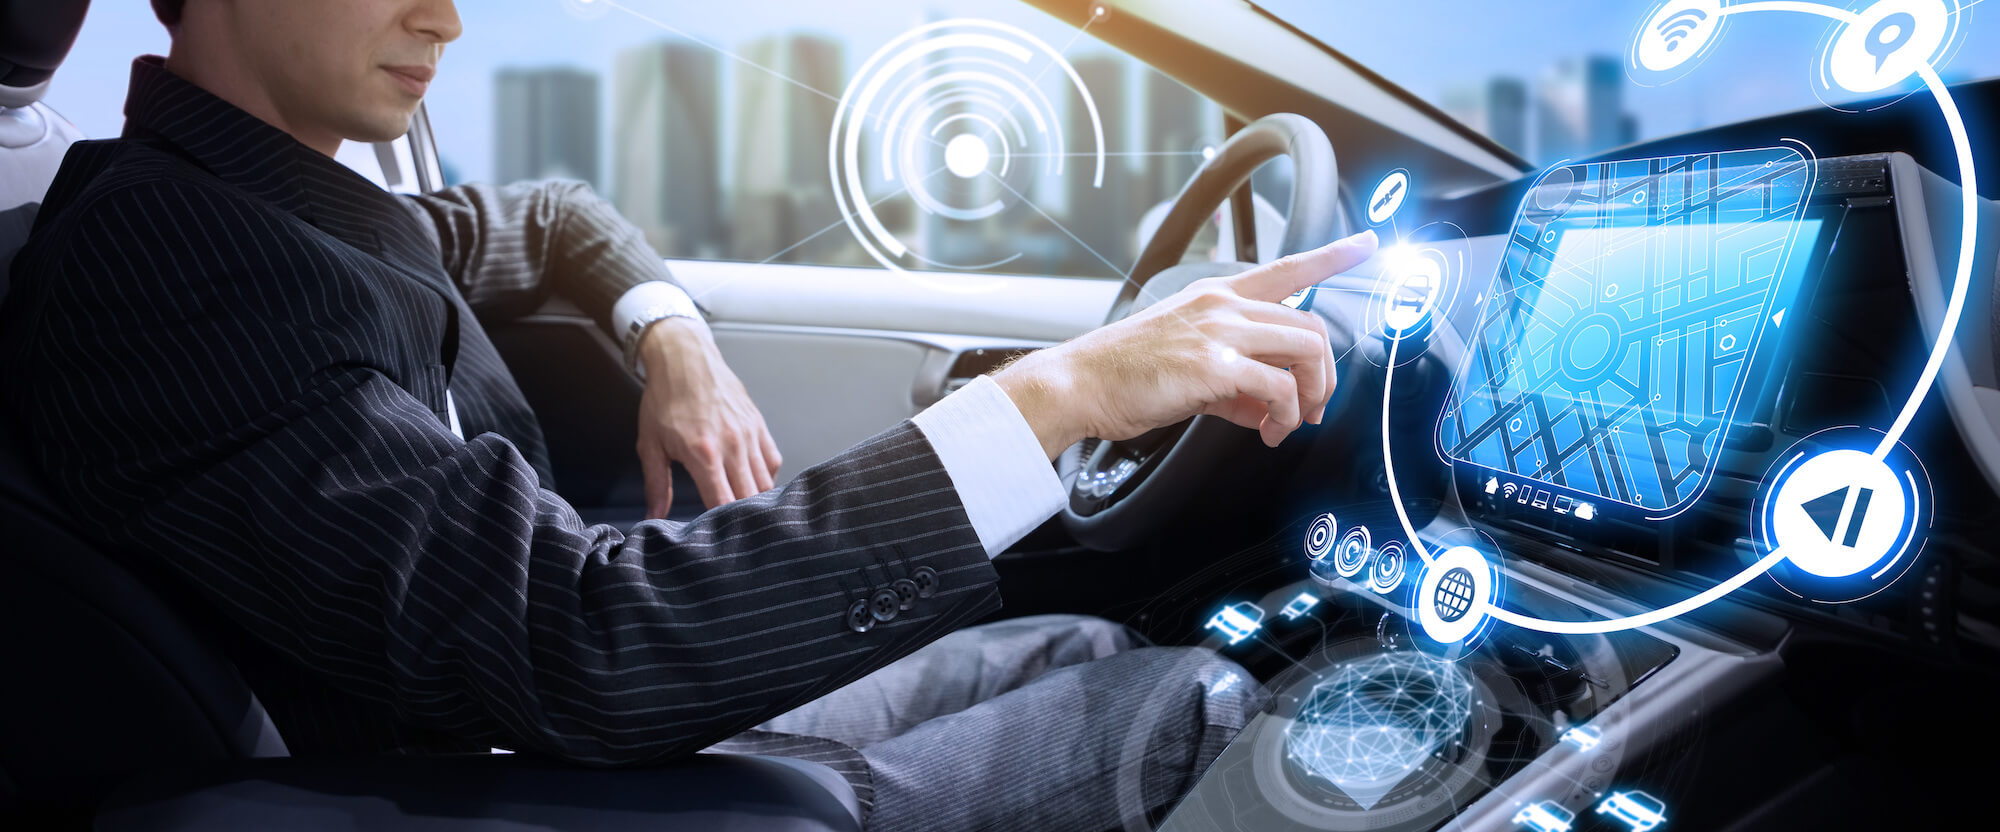 AI in Transportation: How Face Analysis Enables Next-Generation Infotainment Systems